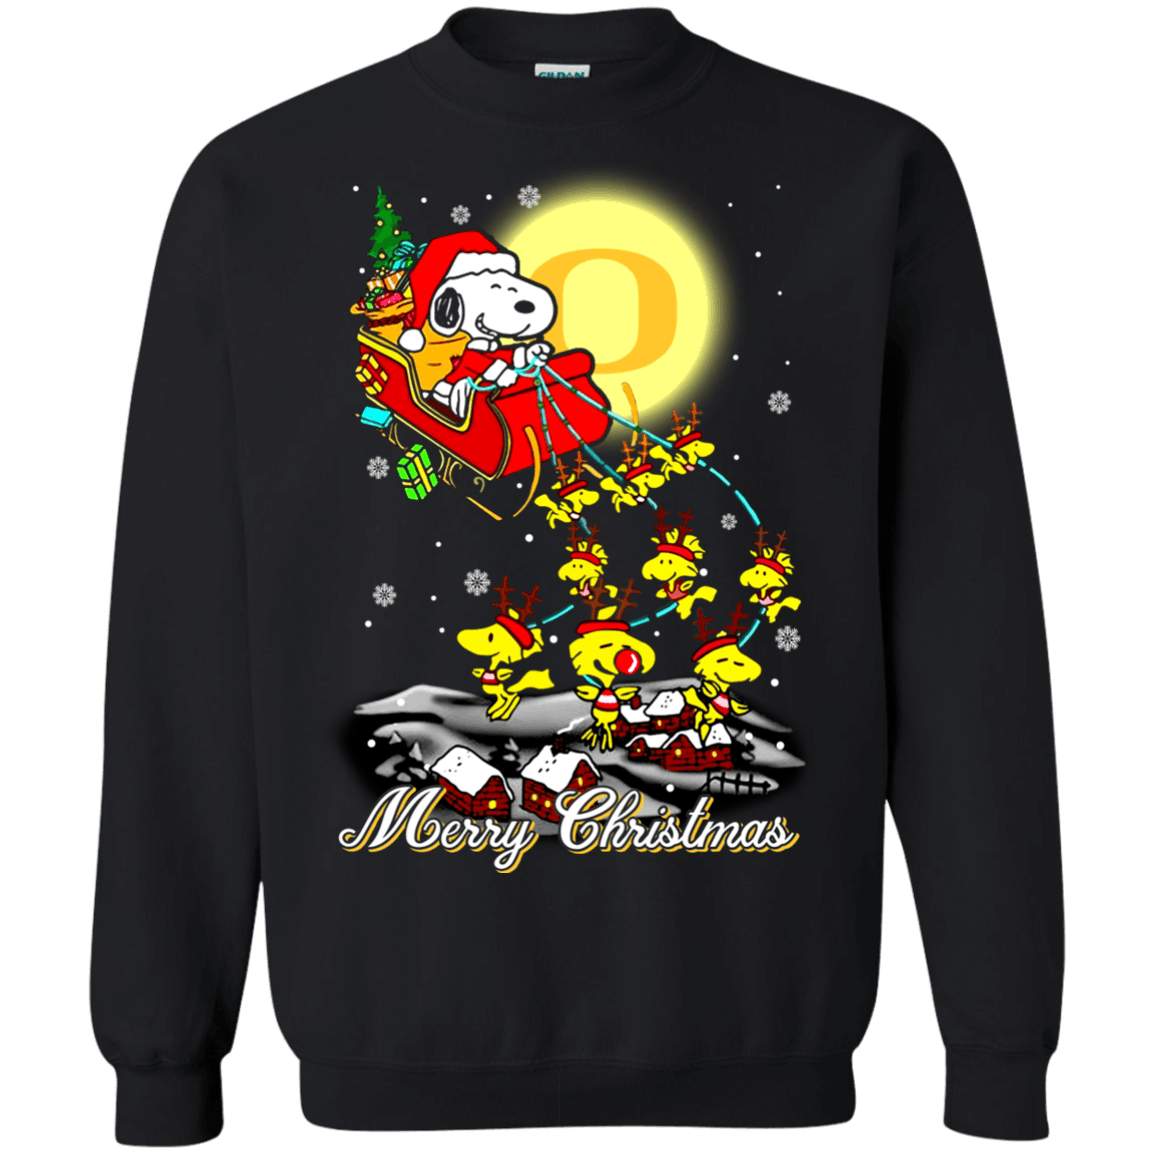 Fabulous Oregon Ducks Ugly Christmas Sweater 2023S Santa Claus With Sleigh And Snoopy Sweatshirts